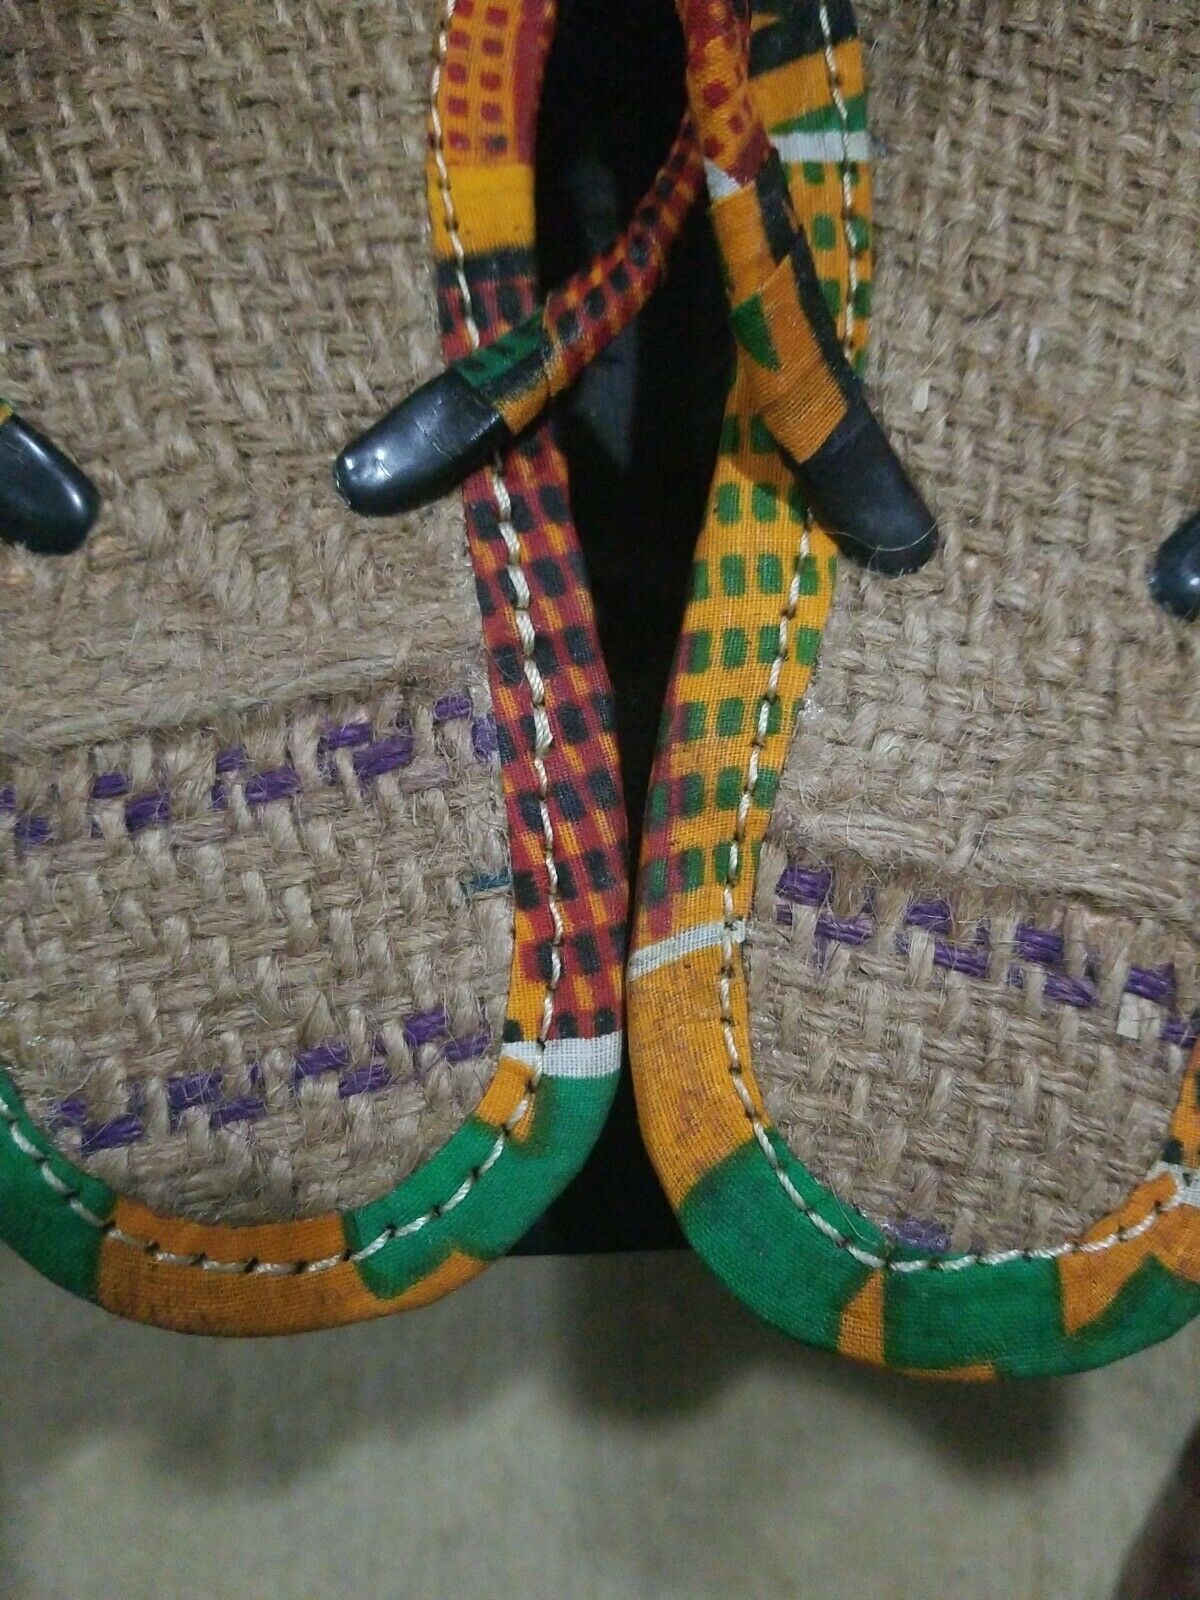 Handmade Kente Slippers with Denim Accents~Size 10M(fits US Size 9M)~$25